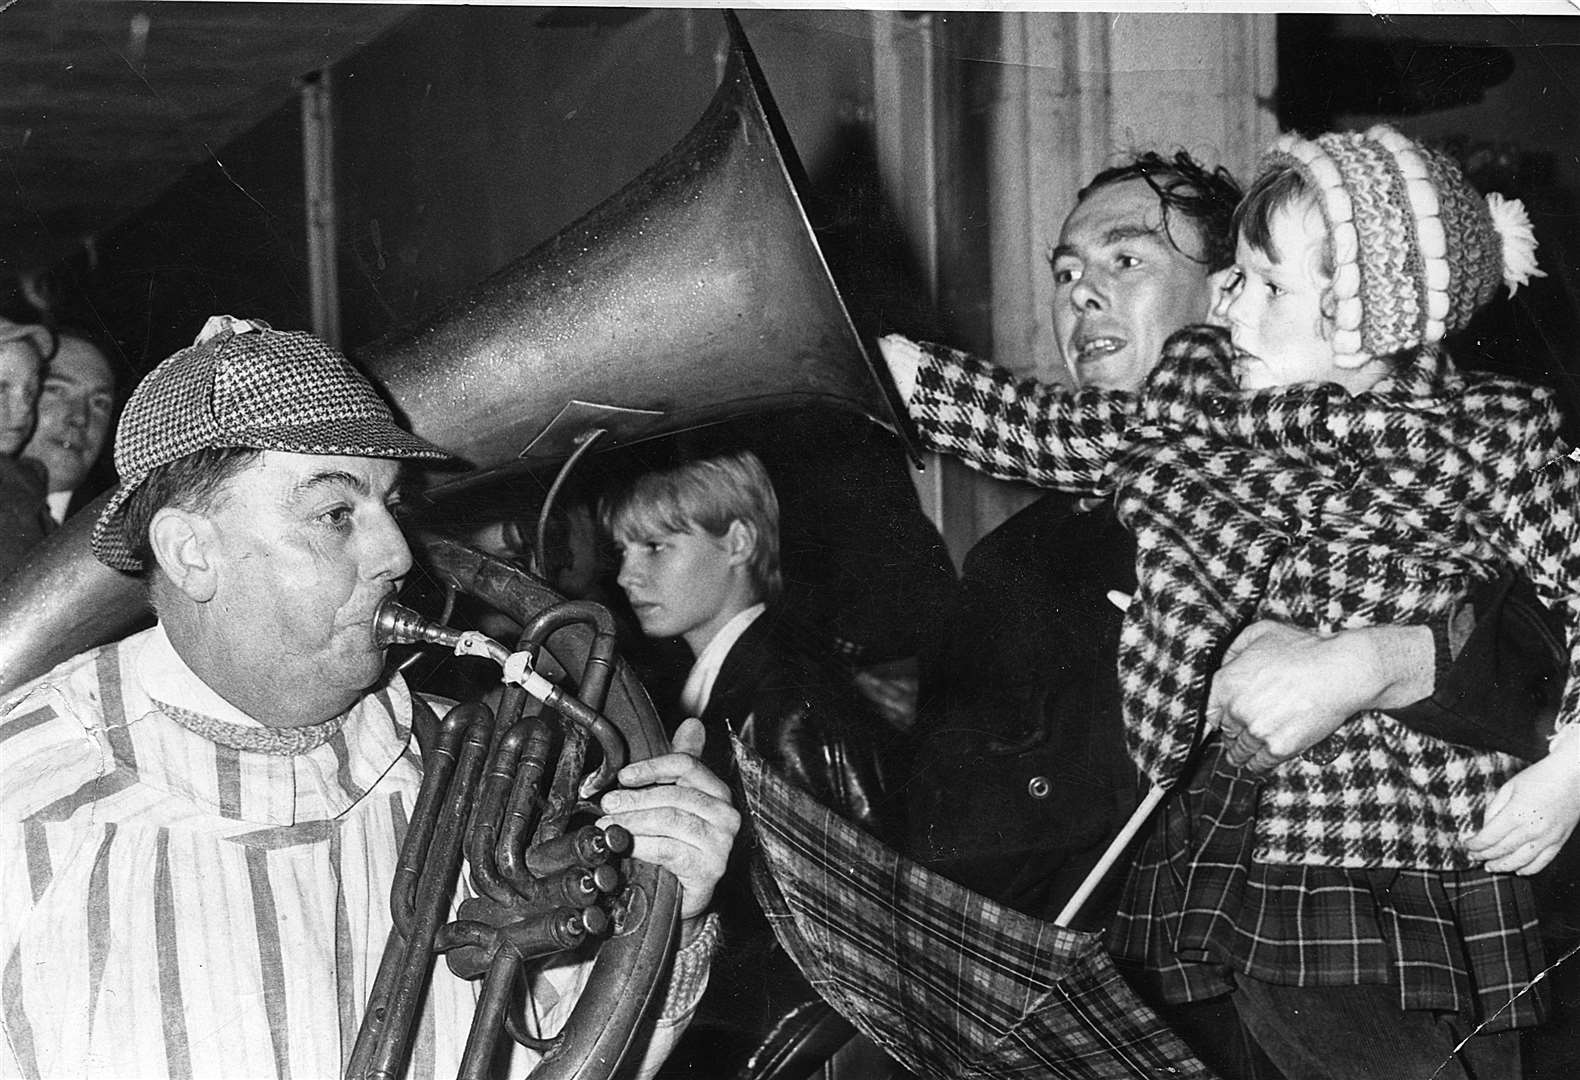 The well known figure of Joe Fagg plays a trombone at Children s Day in 1964